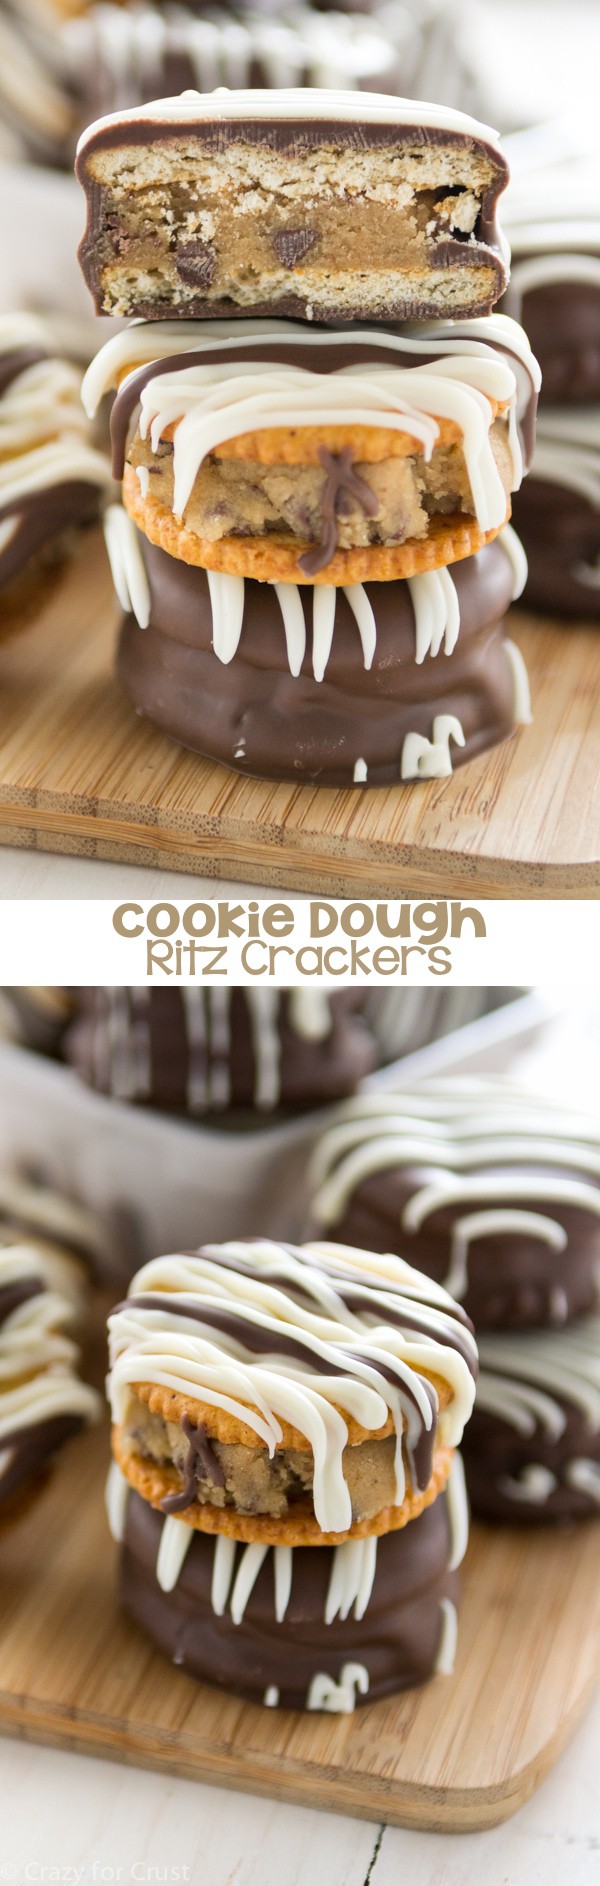 Cookie Dough Ritz Crackers have eggless chocolate chip cookie dough sandwiched between two Ritz crackers and then dipped in chocolate.